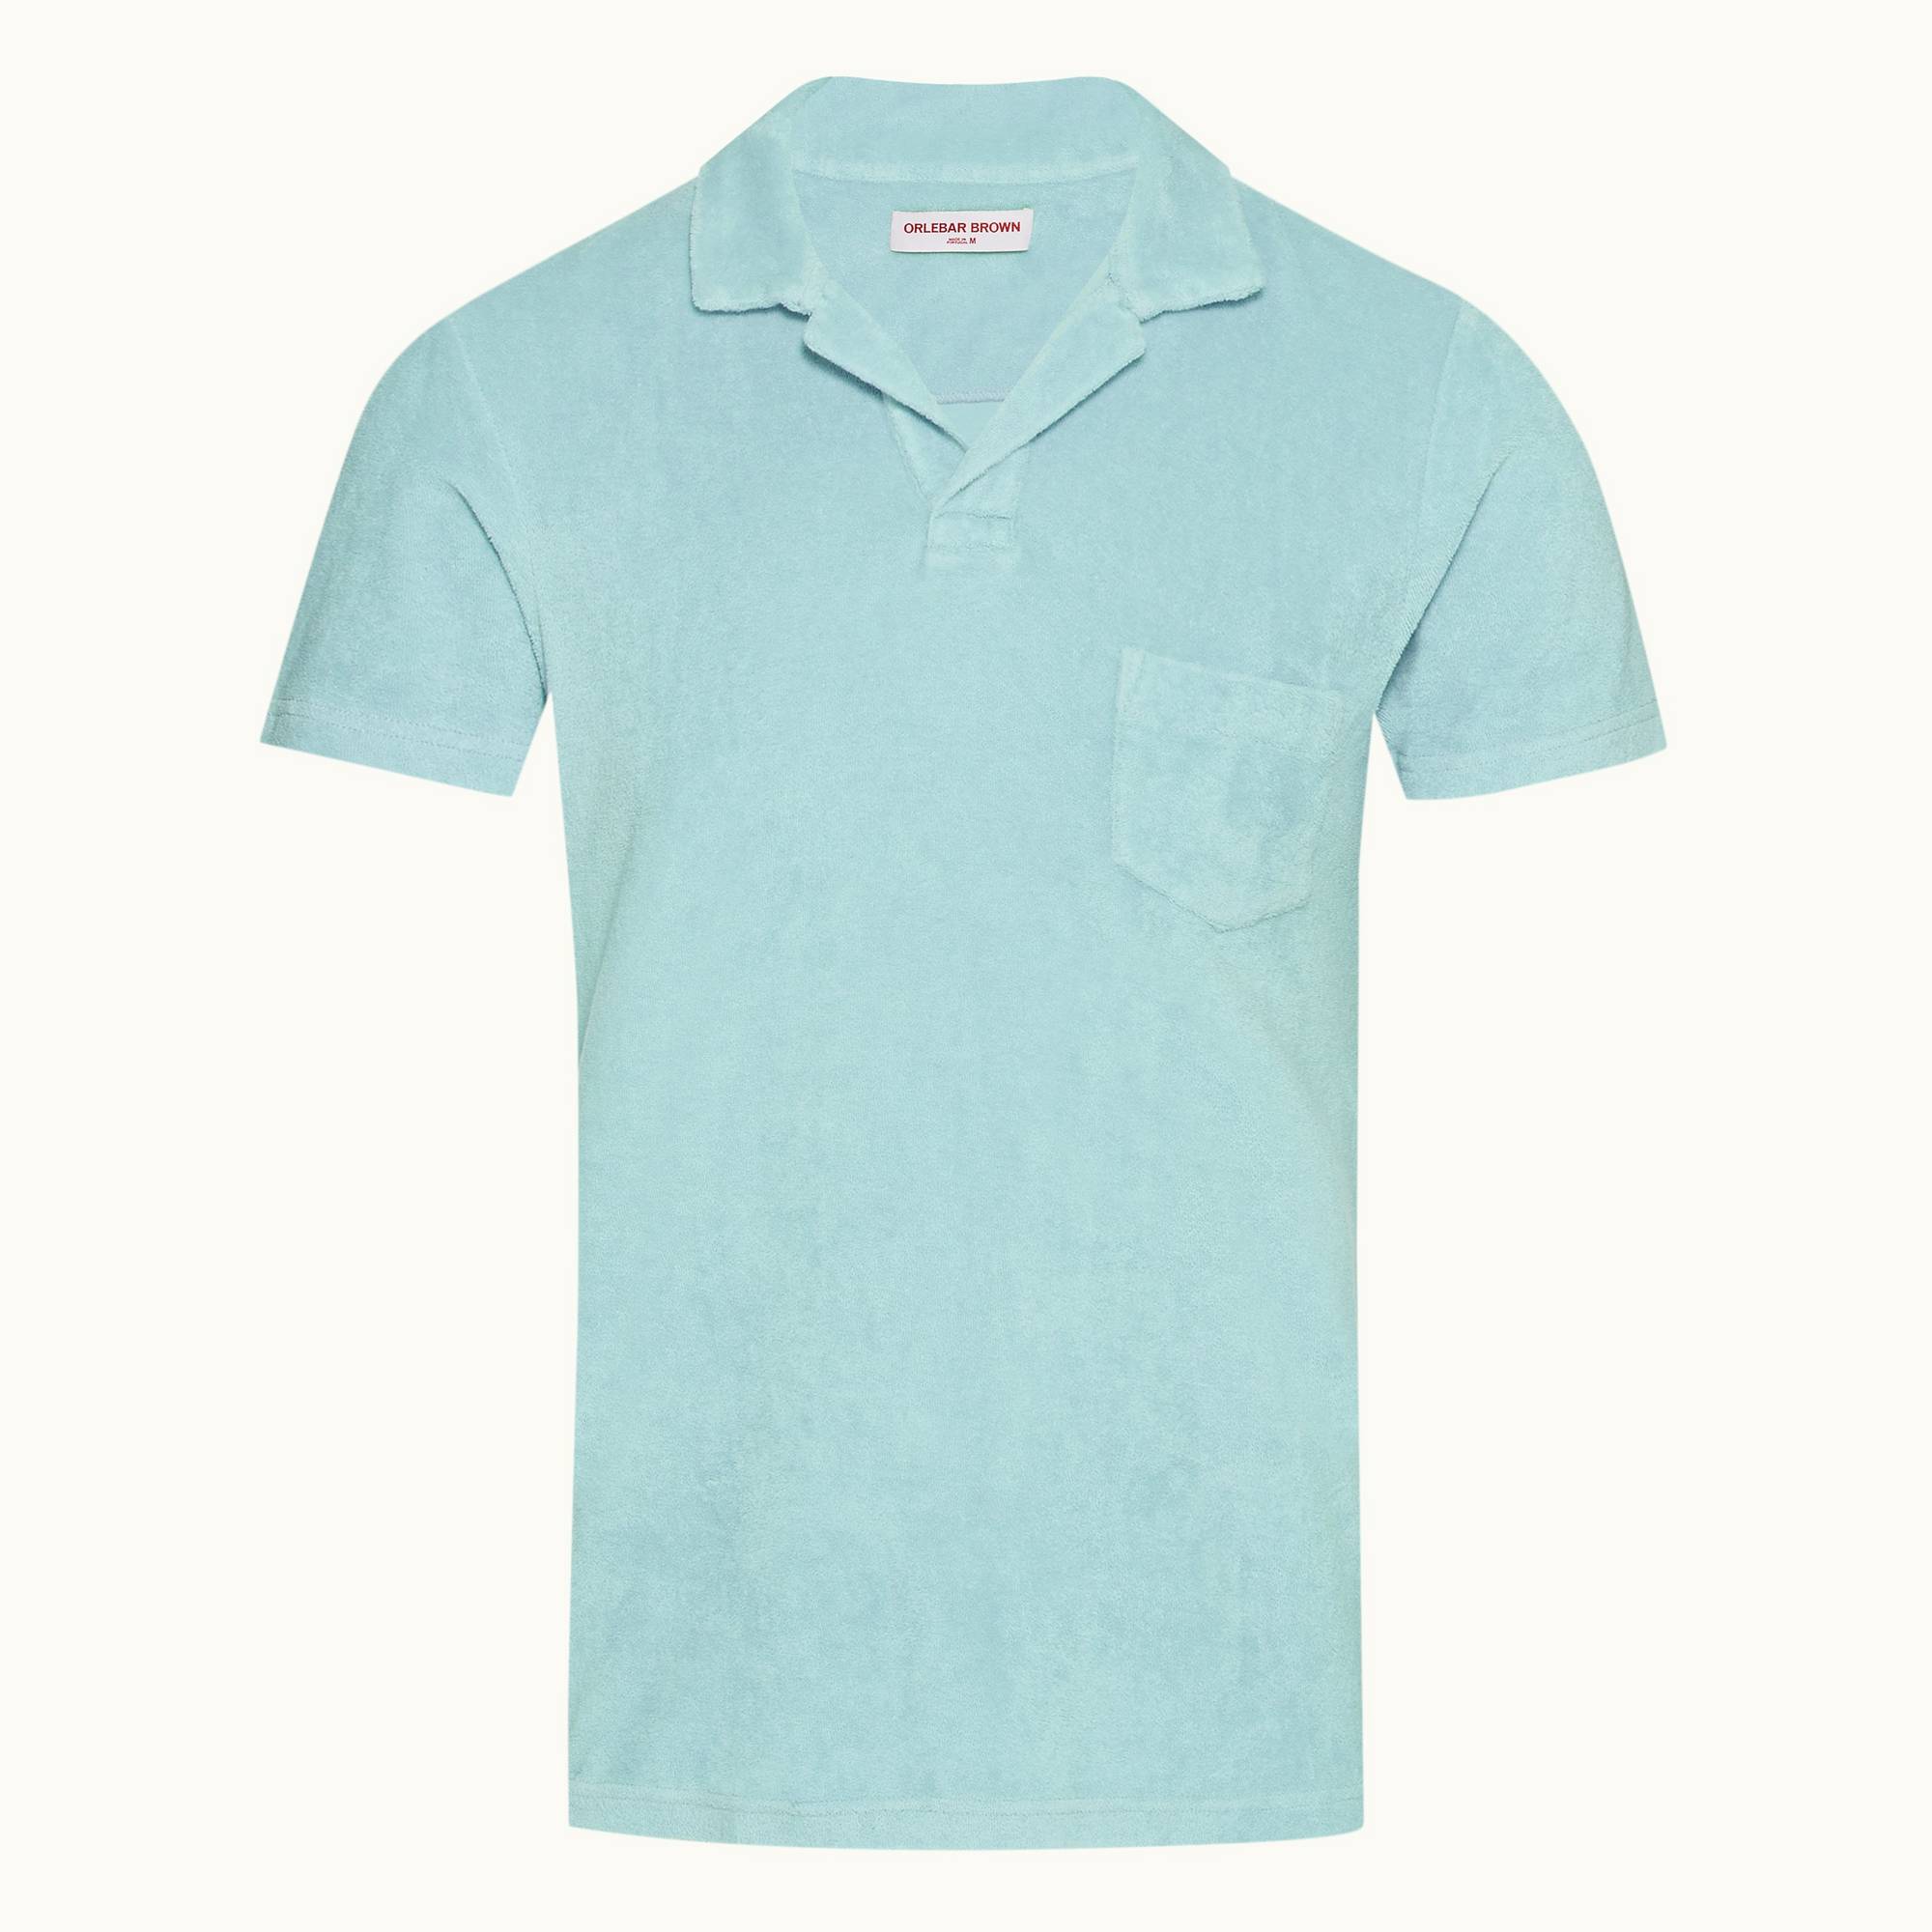 Terry Towelling - Mens Pool Tailored Fit Towelling Resort Polo Shirt